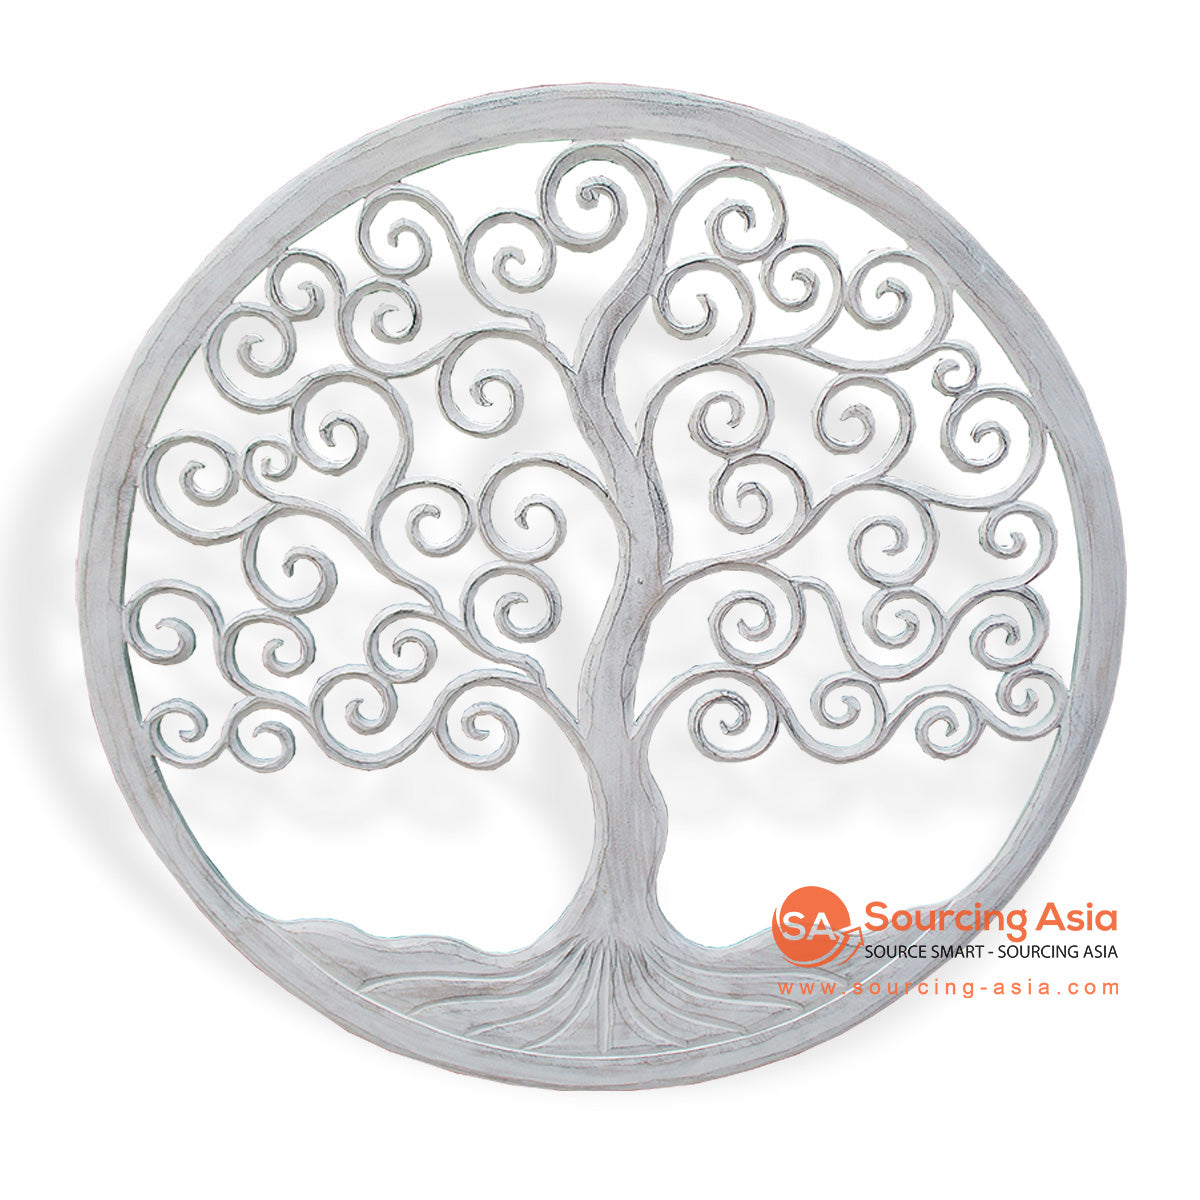 LUH013-100W WHITE WOODEN ROUND "TREE OF LIFE" PANEL